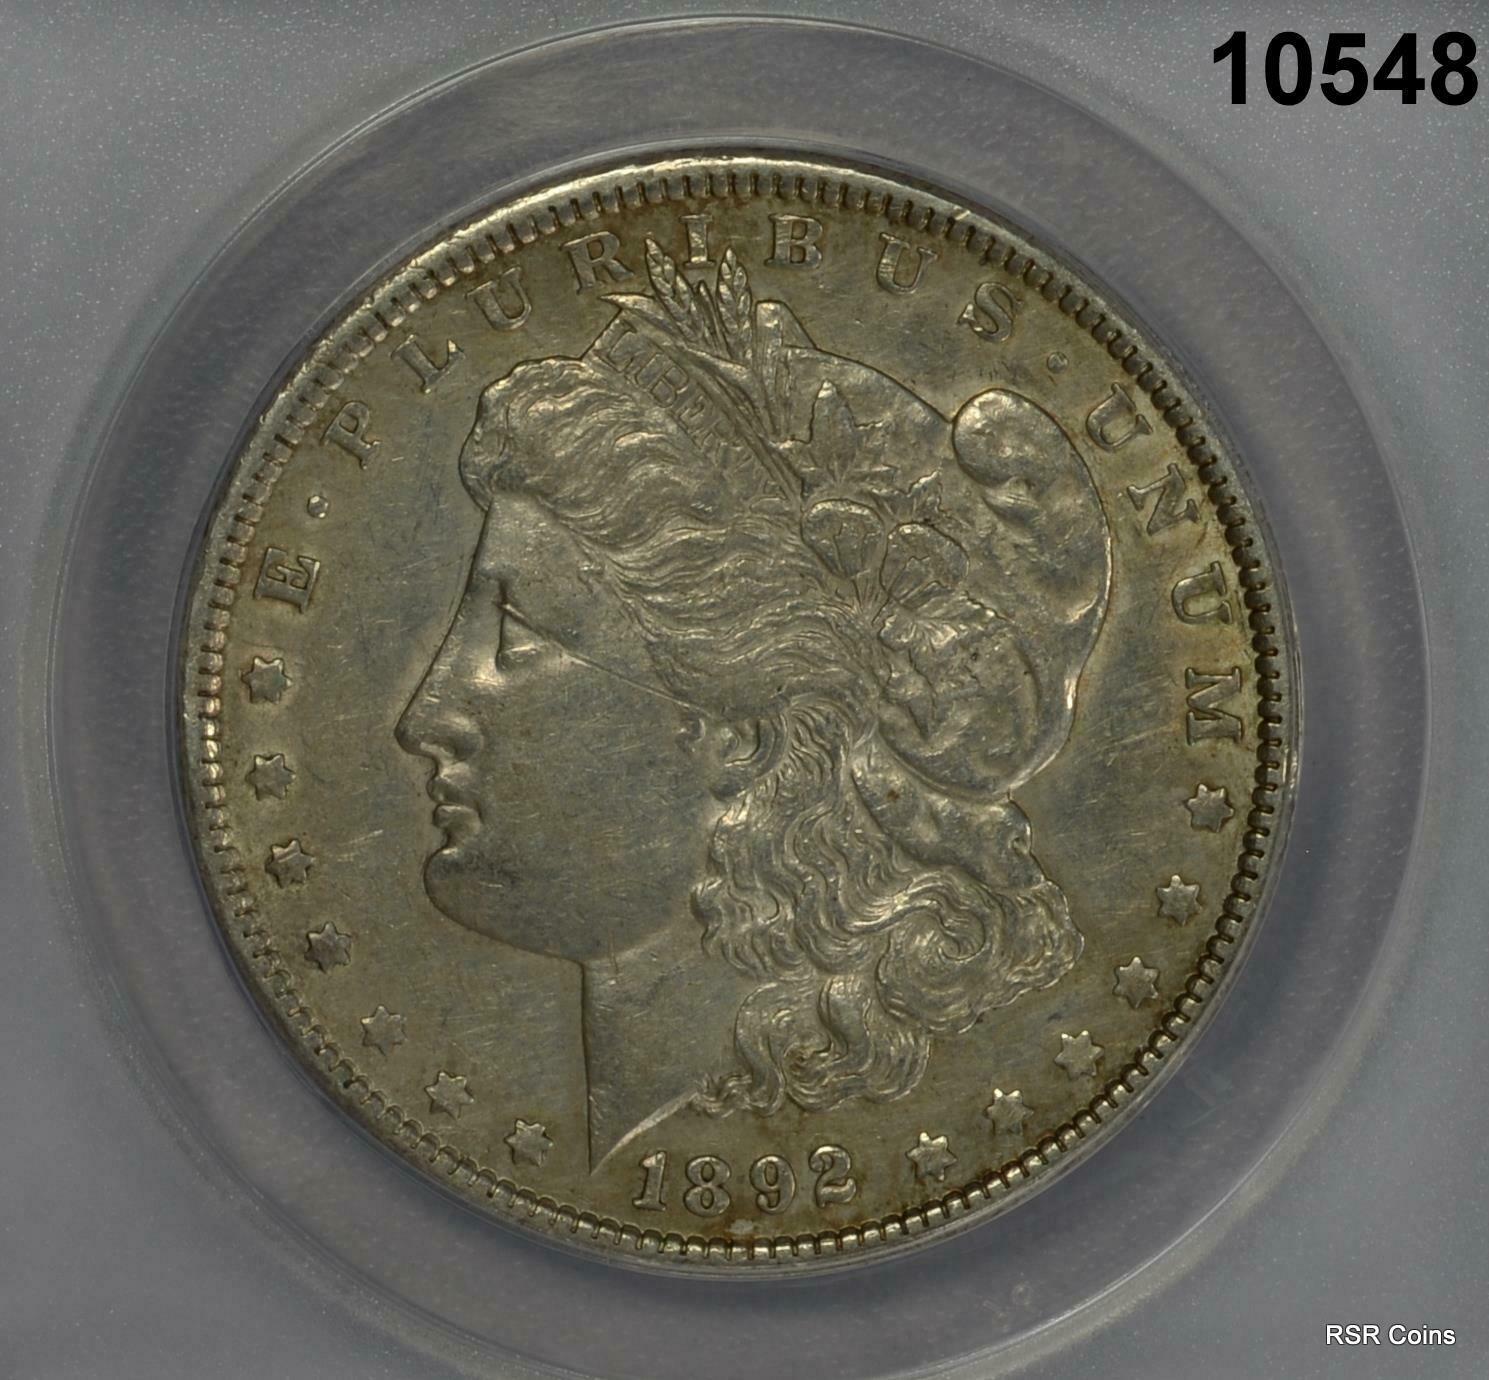 1892 MORGAN SILVER DOLLAR ANACS CERTIFIED EF45 CLEANED SCARCE DATE! #10548